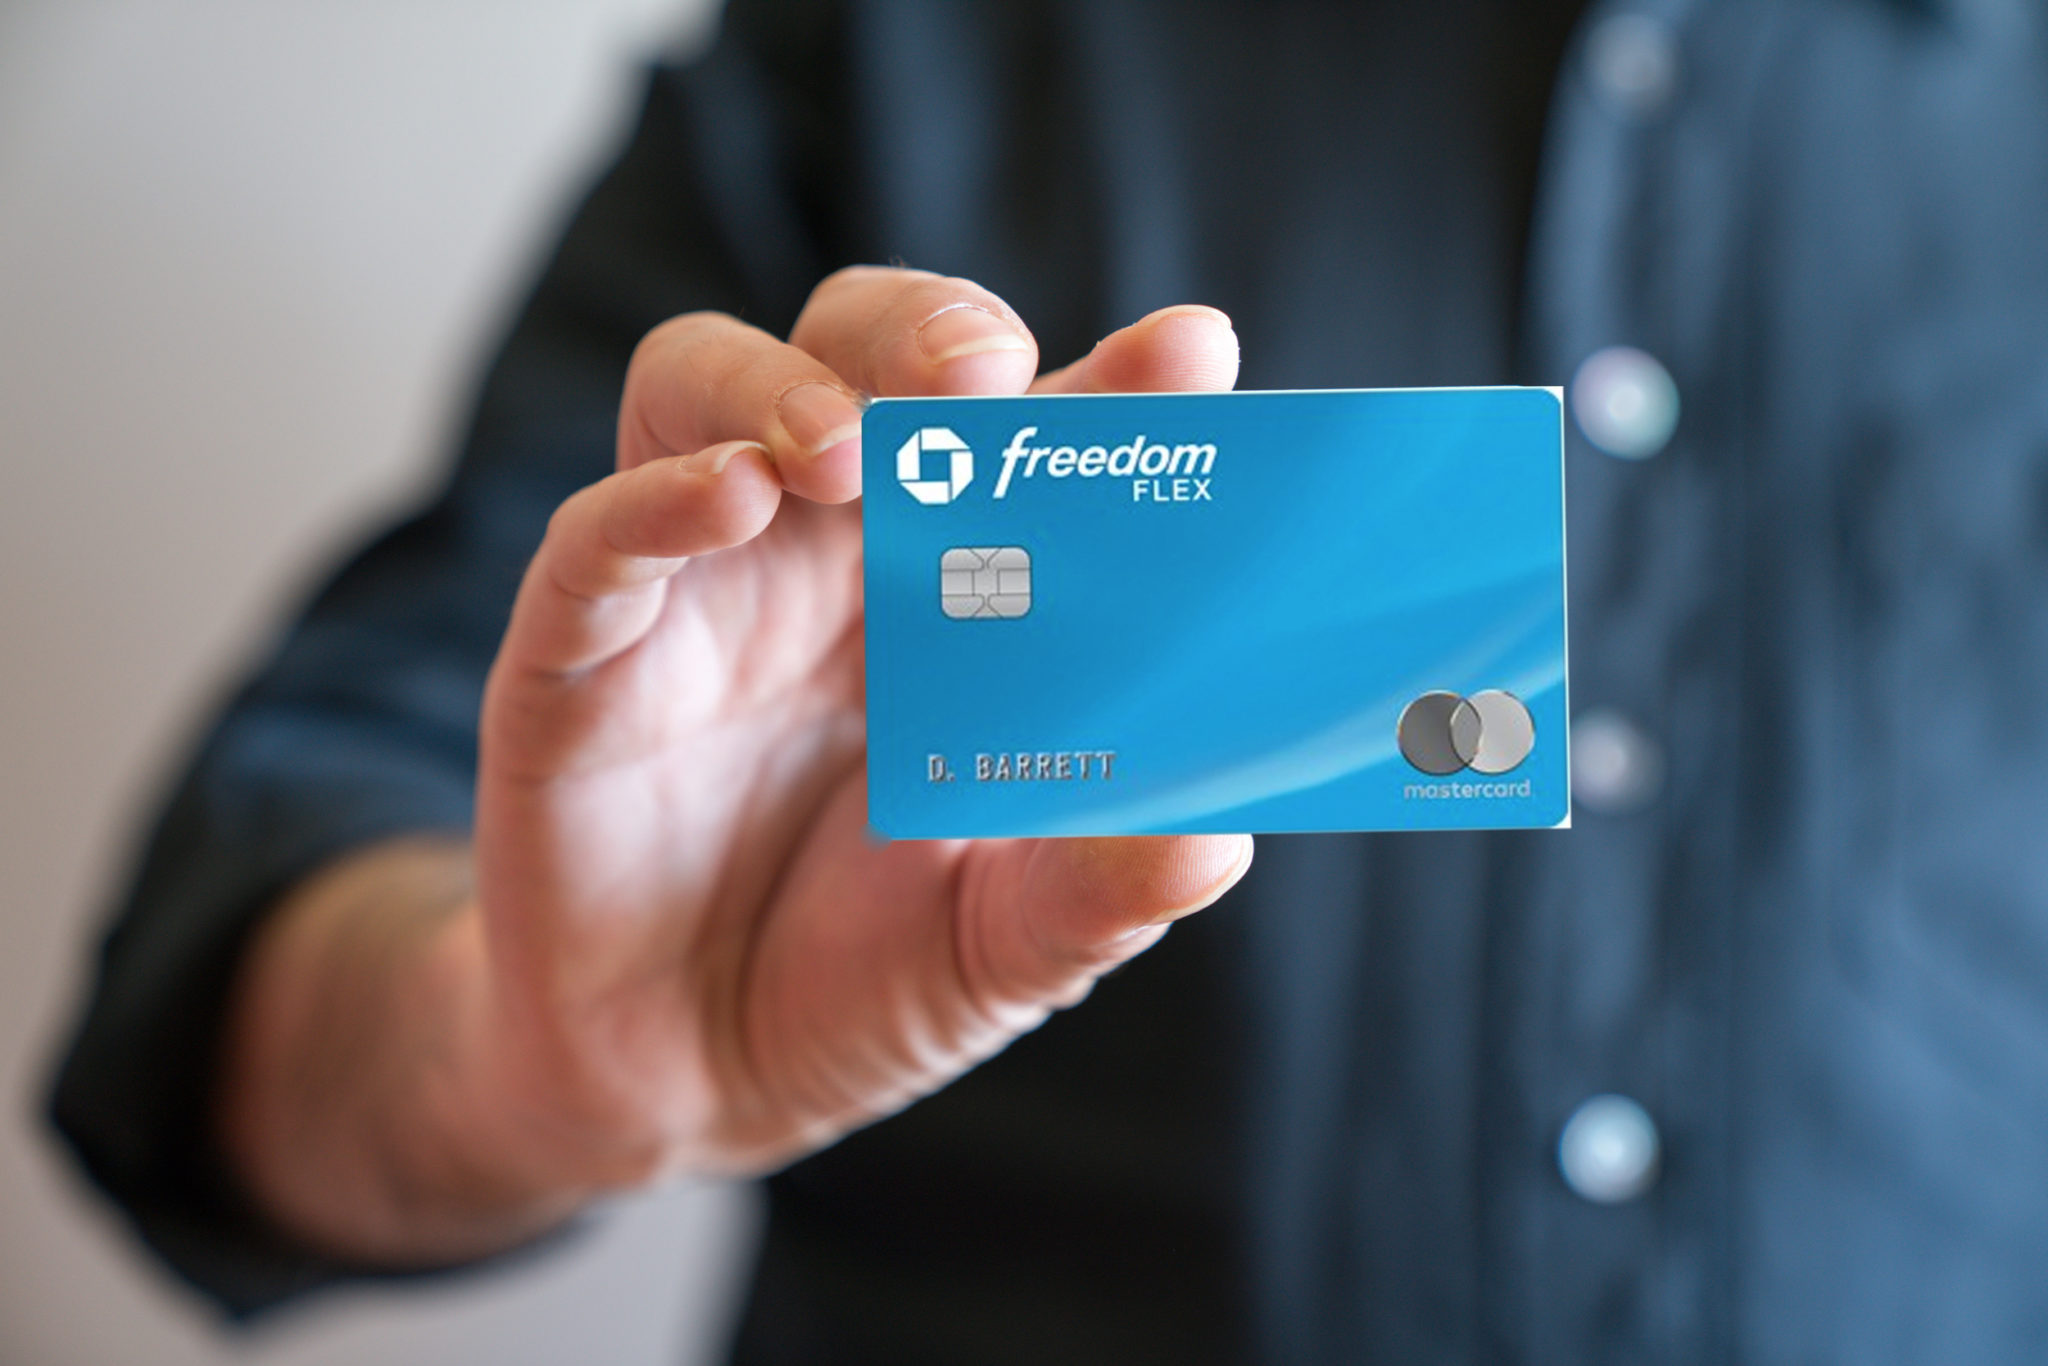 chase-freedom-flex-card-front-back-eye-of-the-flyer